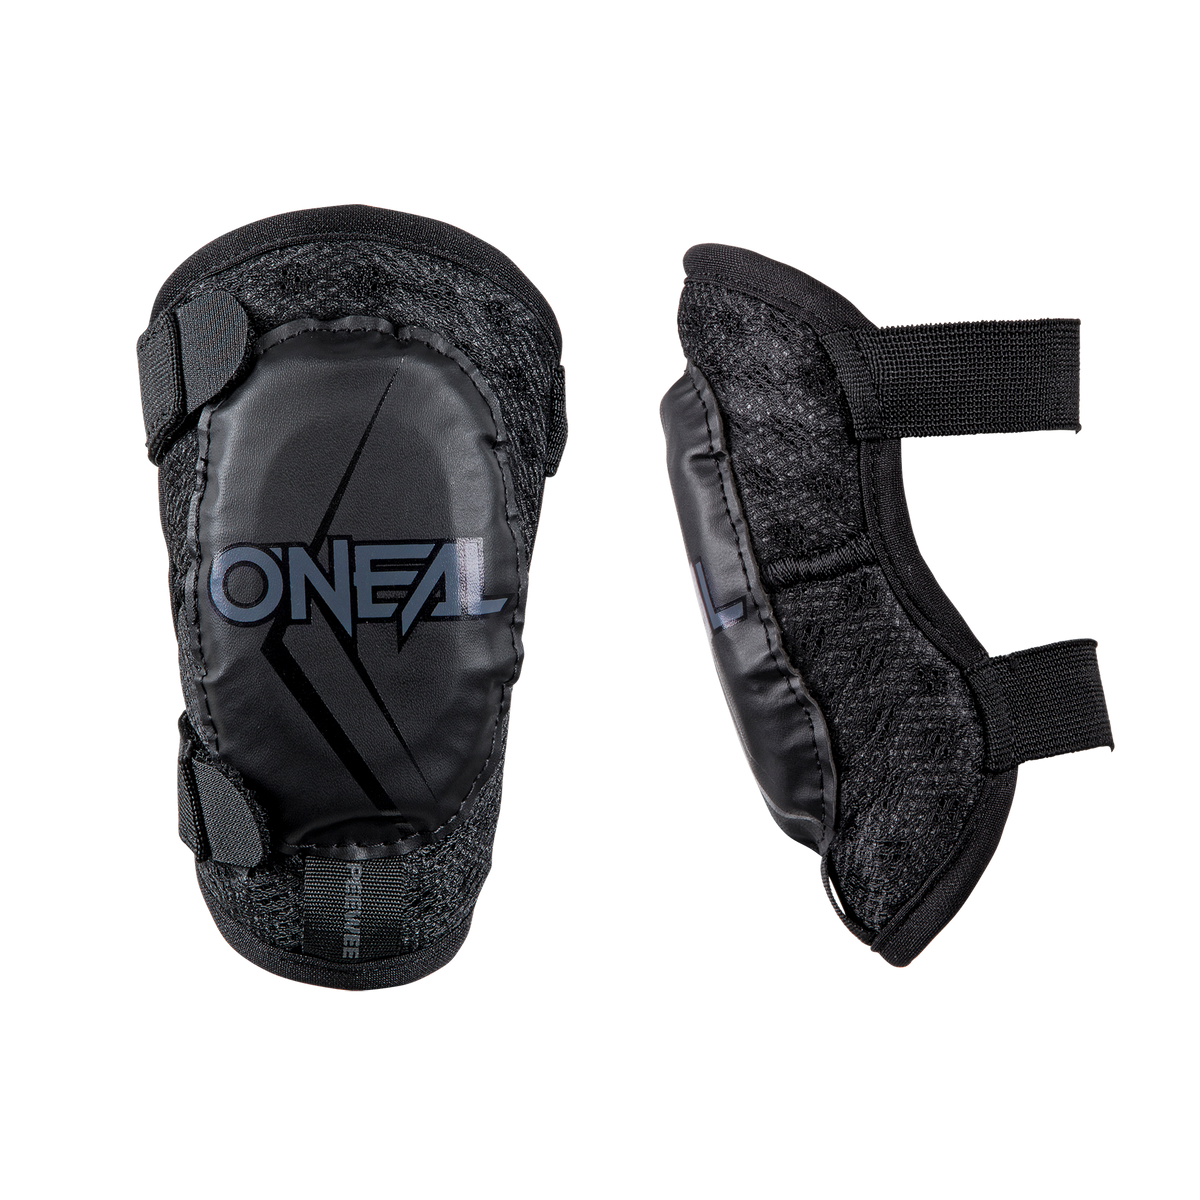 https://cdn.oneal.eu/assets/importedProductImages/PROTECTION/YOUTH/ELBOW/PEEWEE/black/2017_ONeal_PeeWee_Elbow_Guard_black_front.png